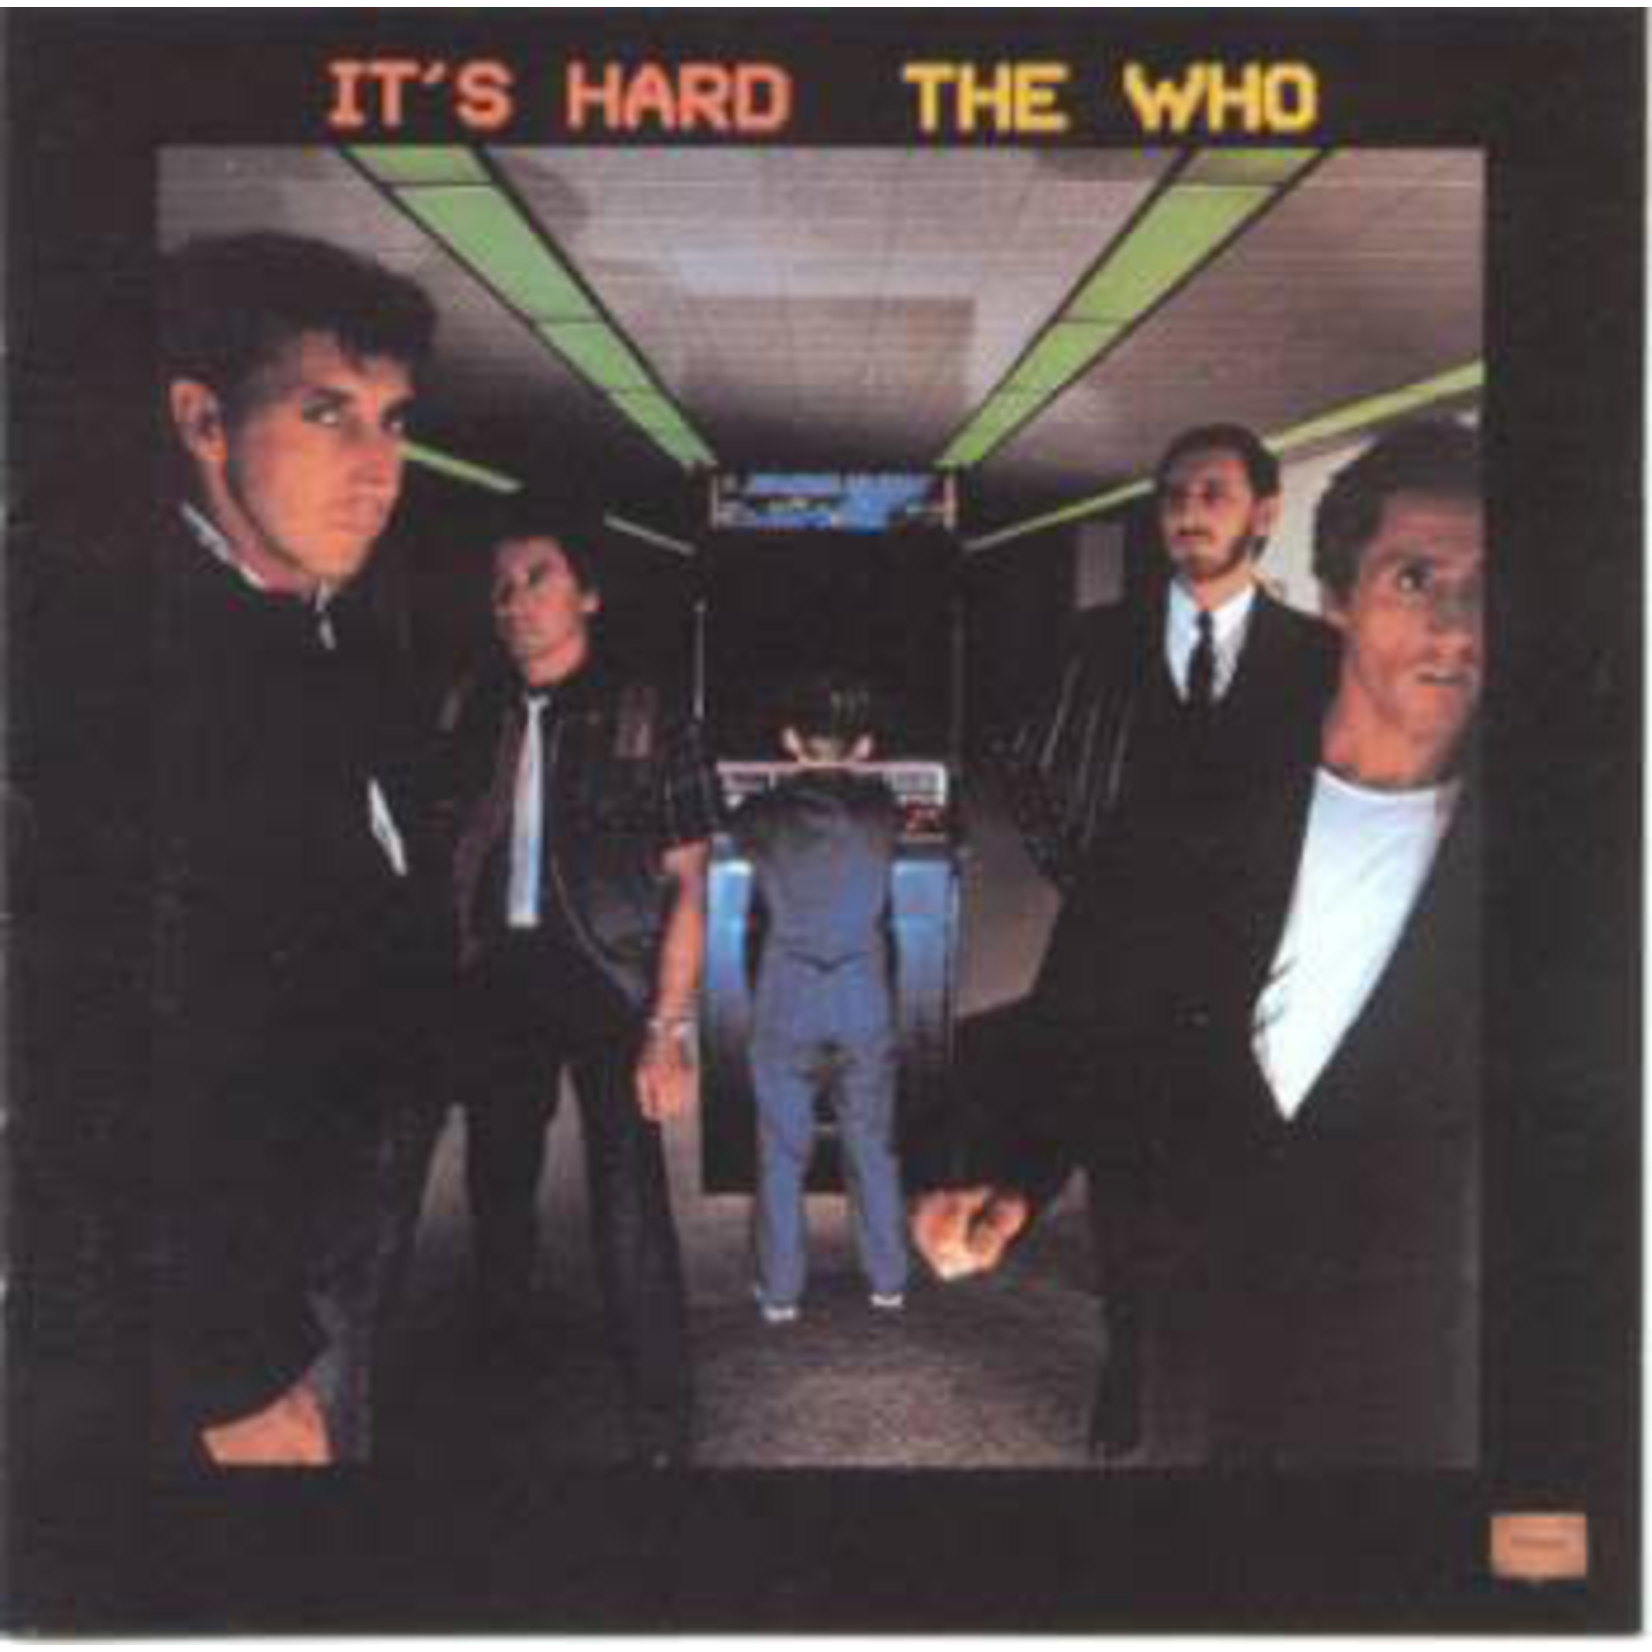 The Who The Who – It's Hard (VG, 1982, LP, Warner Bros. Records – 92 37311)